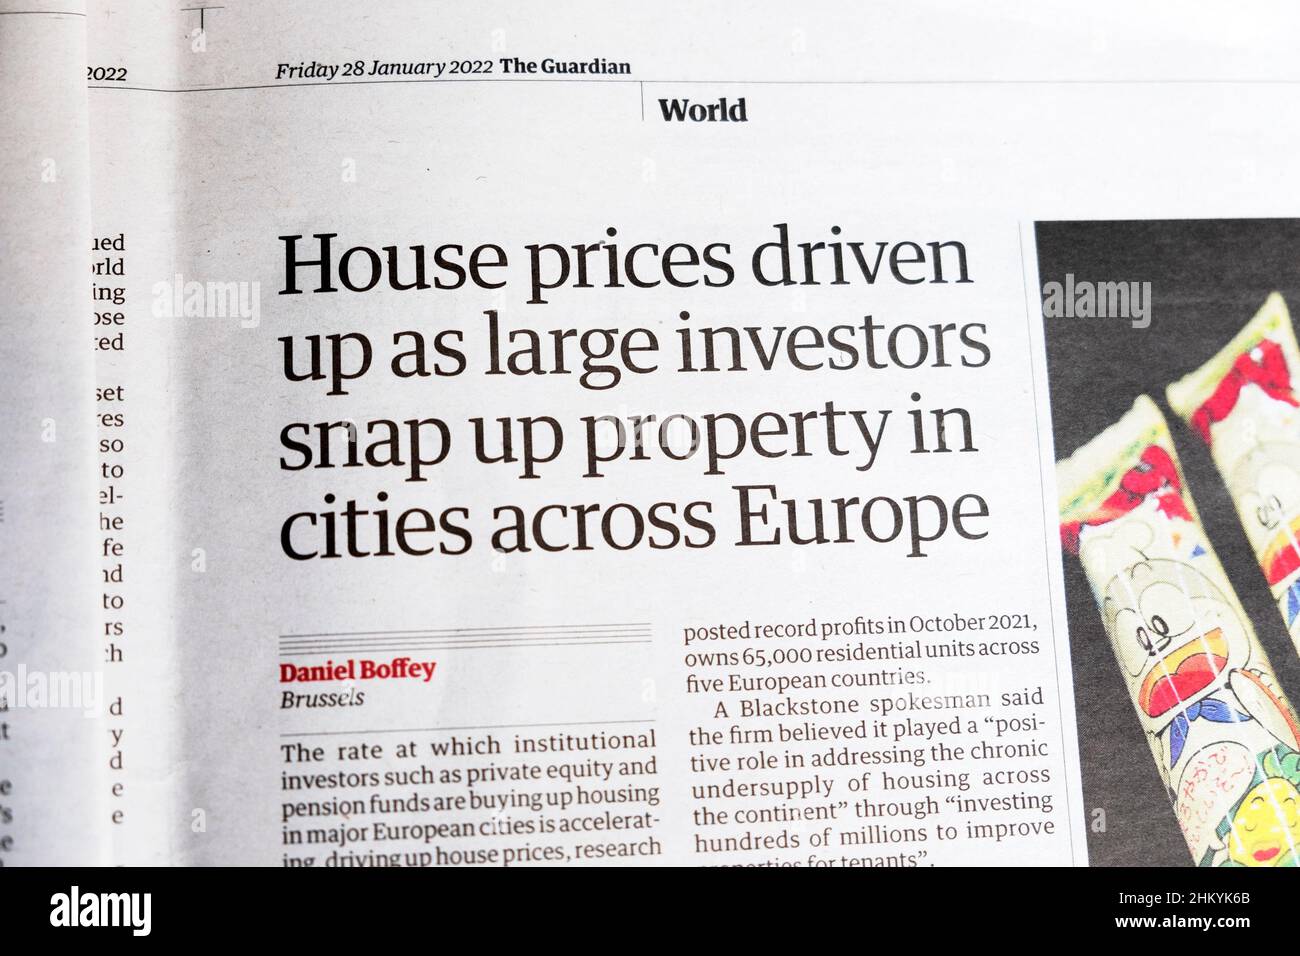 'House prices driven up as large investors snap up property in cities across Europe' Guardian newspaper headline clipping on 28 January 2022 London UK Stock Photo